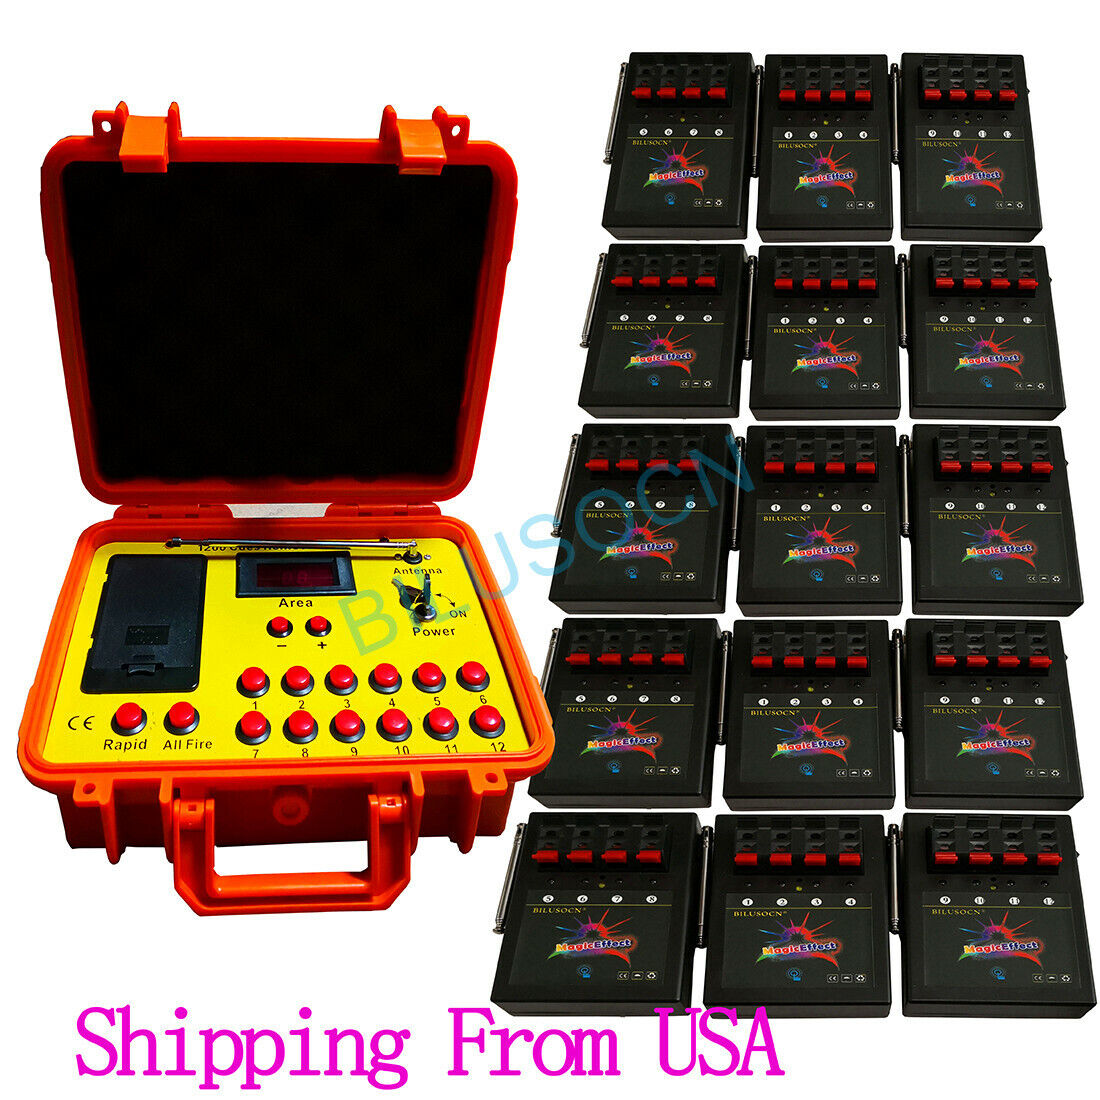 NEW 500M 60 cues fireworks firing system 1200cues wireless control Ship From USA